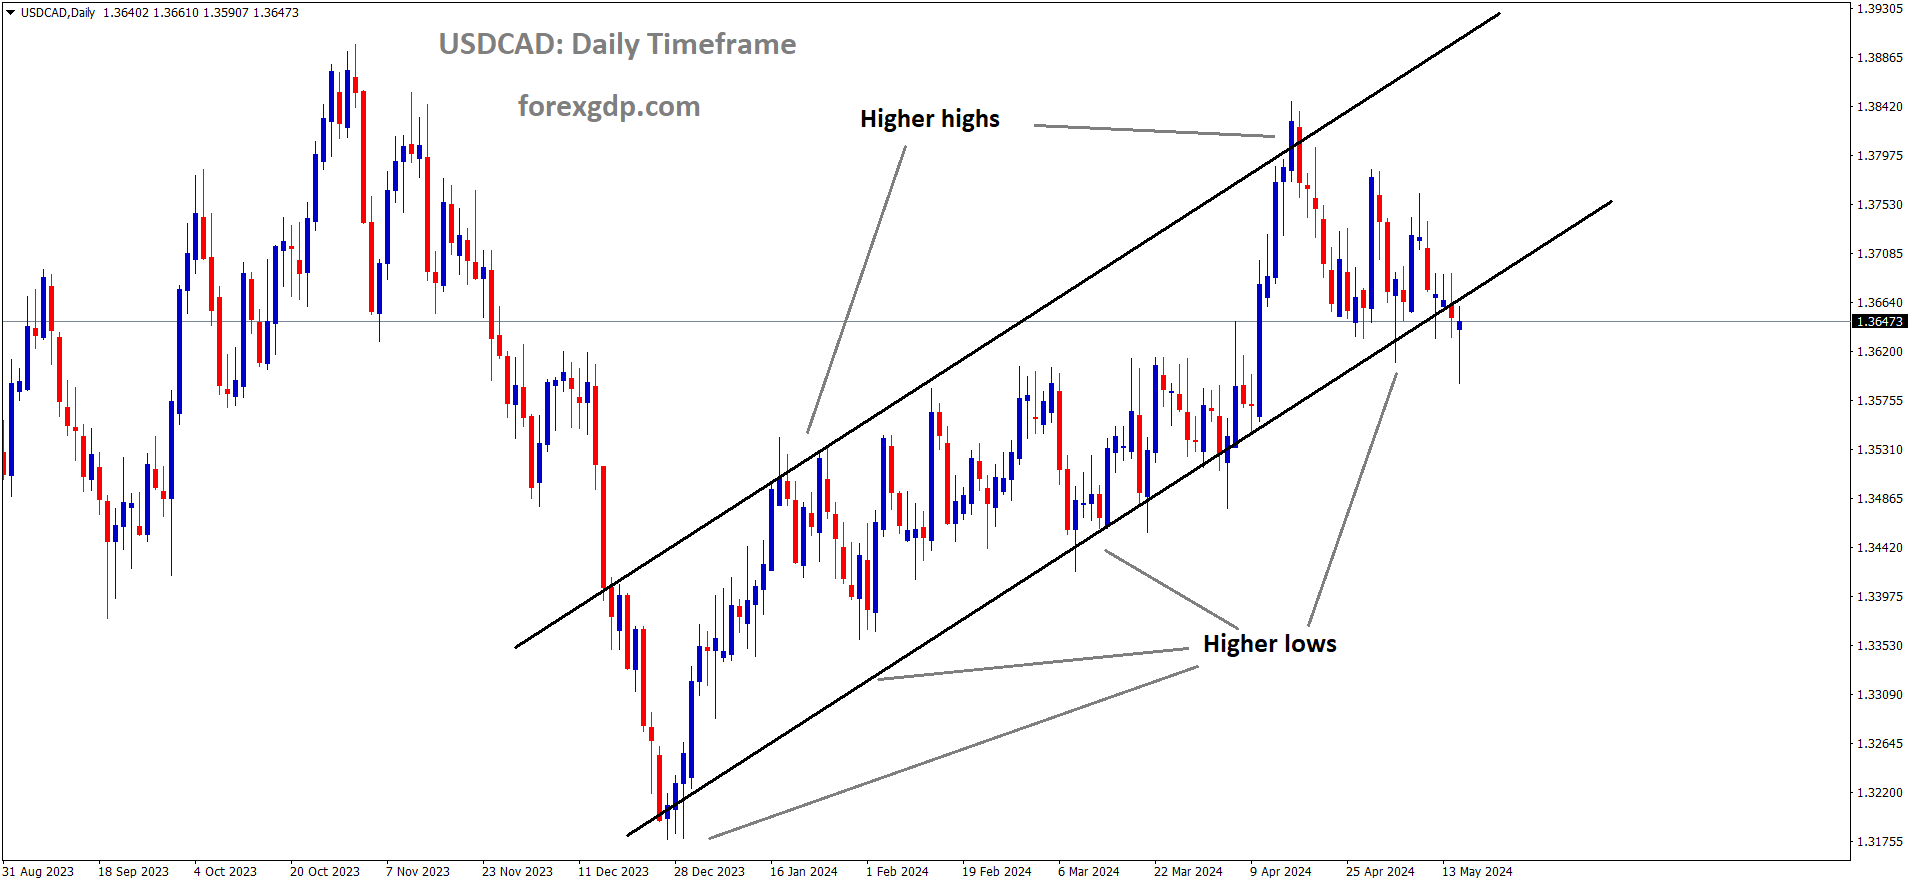 USDCAD is moving in Ascending channel and market has reached higher low area of the channel